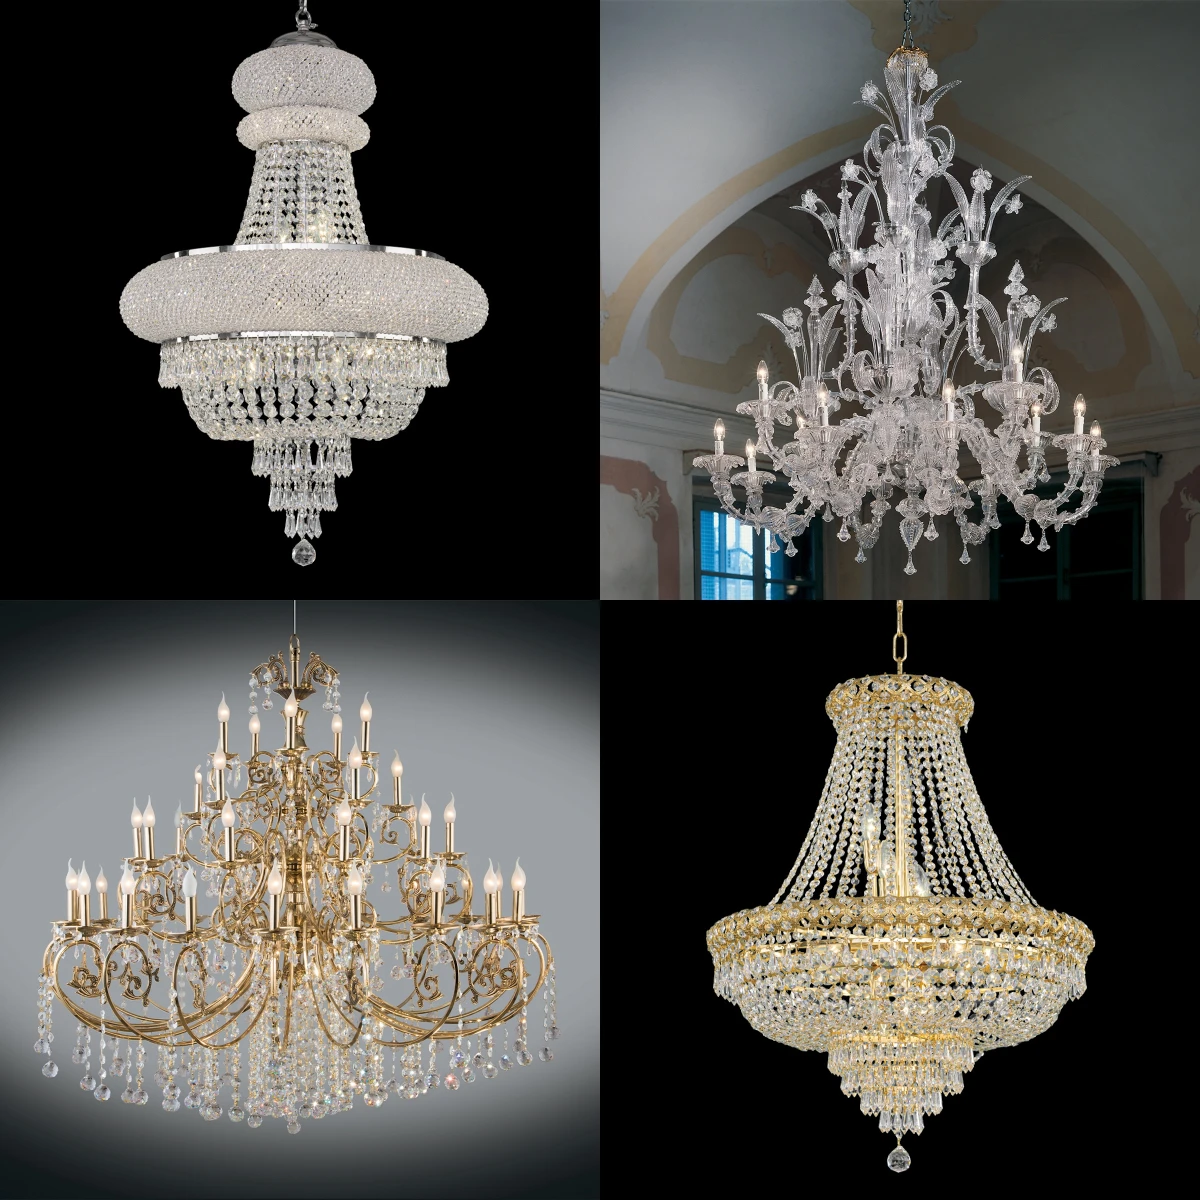 Bespoke personalized lighting and chandeliers by Modenese luxury manufacturer in Italy